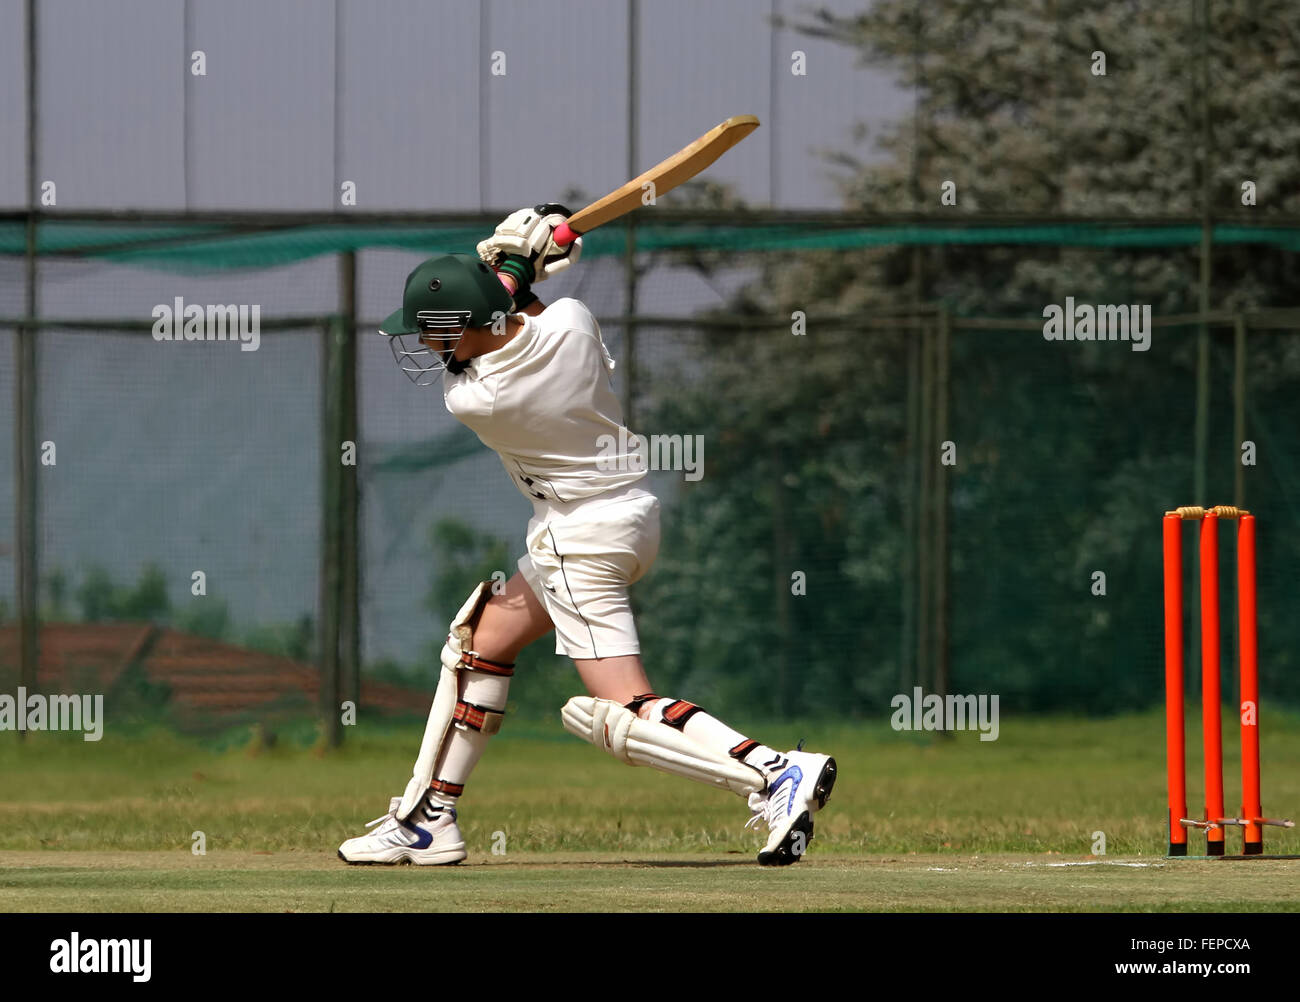 A young left hand cricket player drives the ball through the covers and ends with a beautiful follow-through Stock Photo